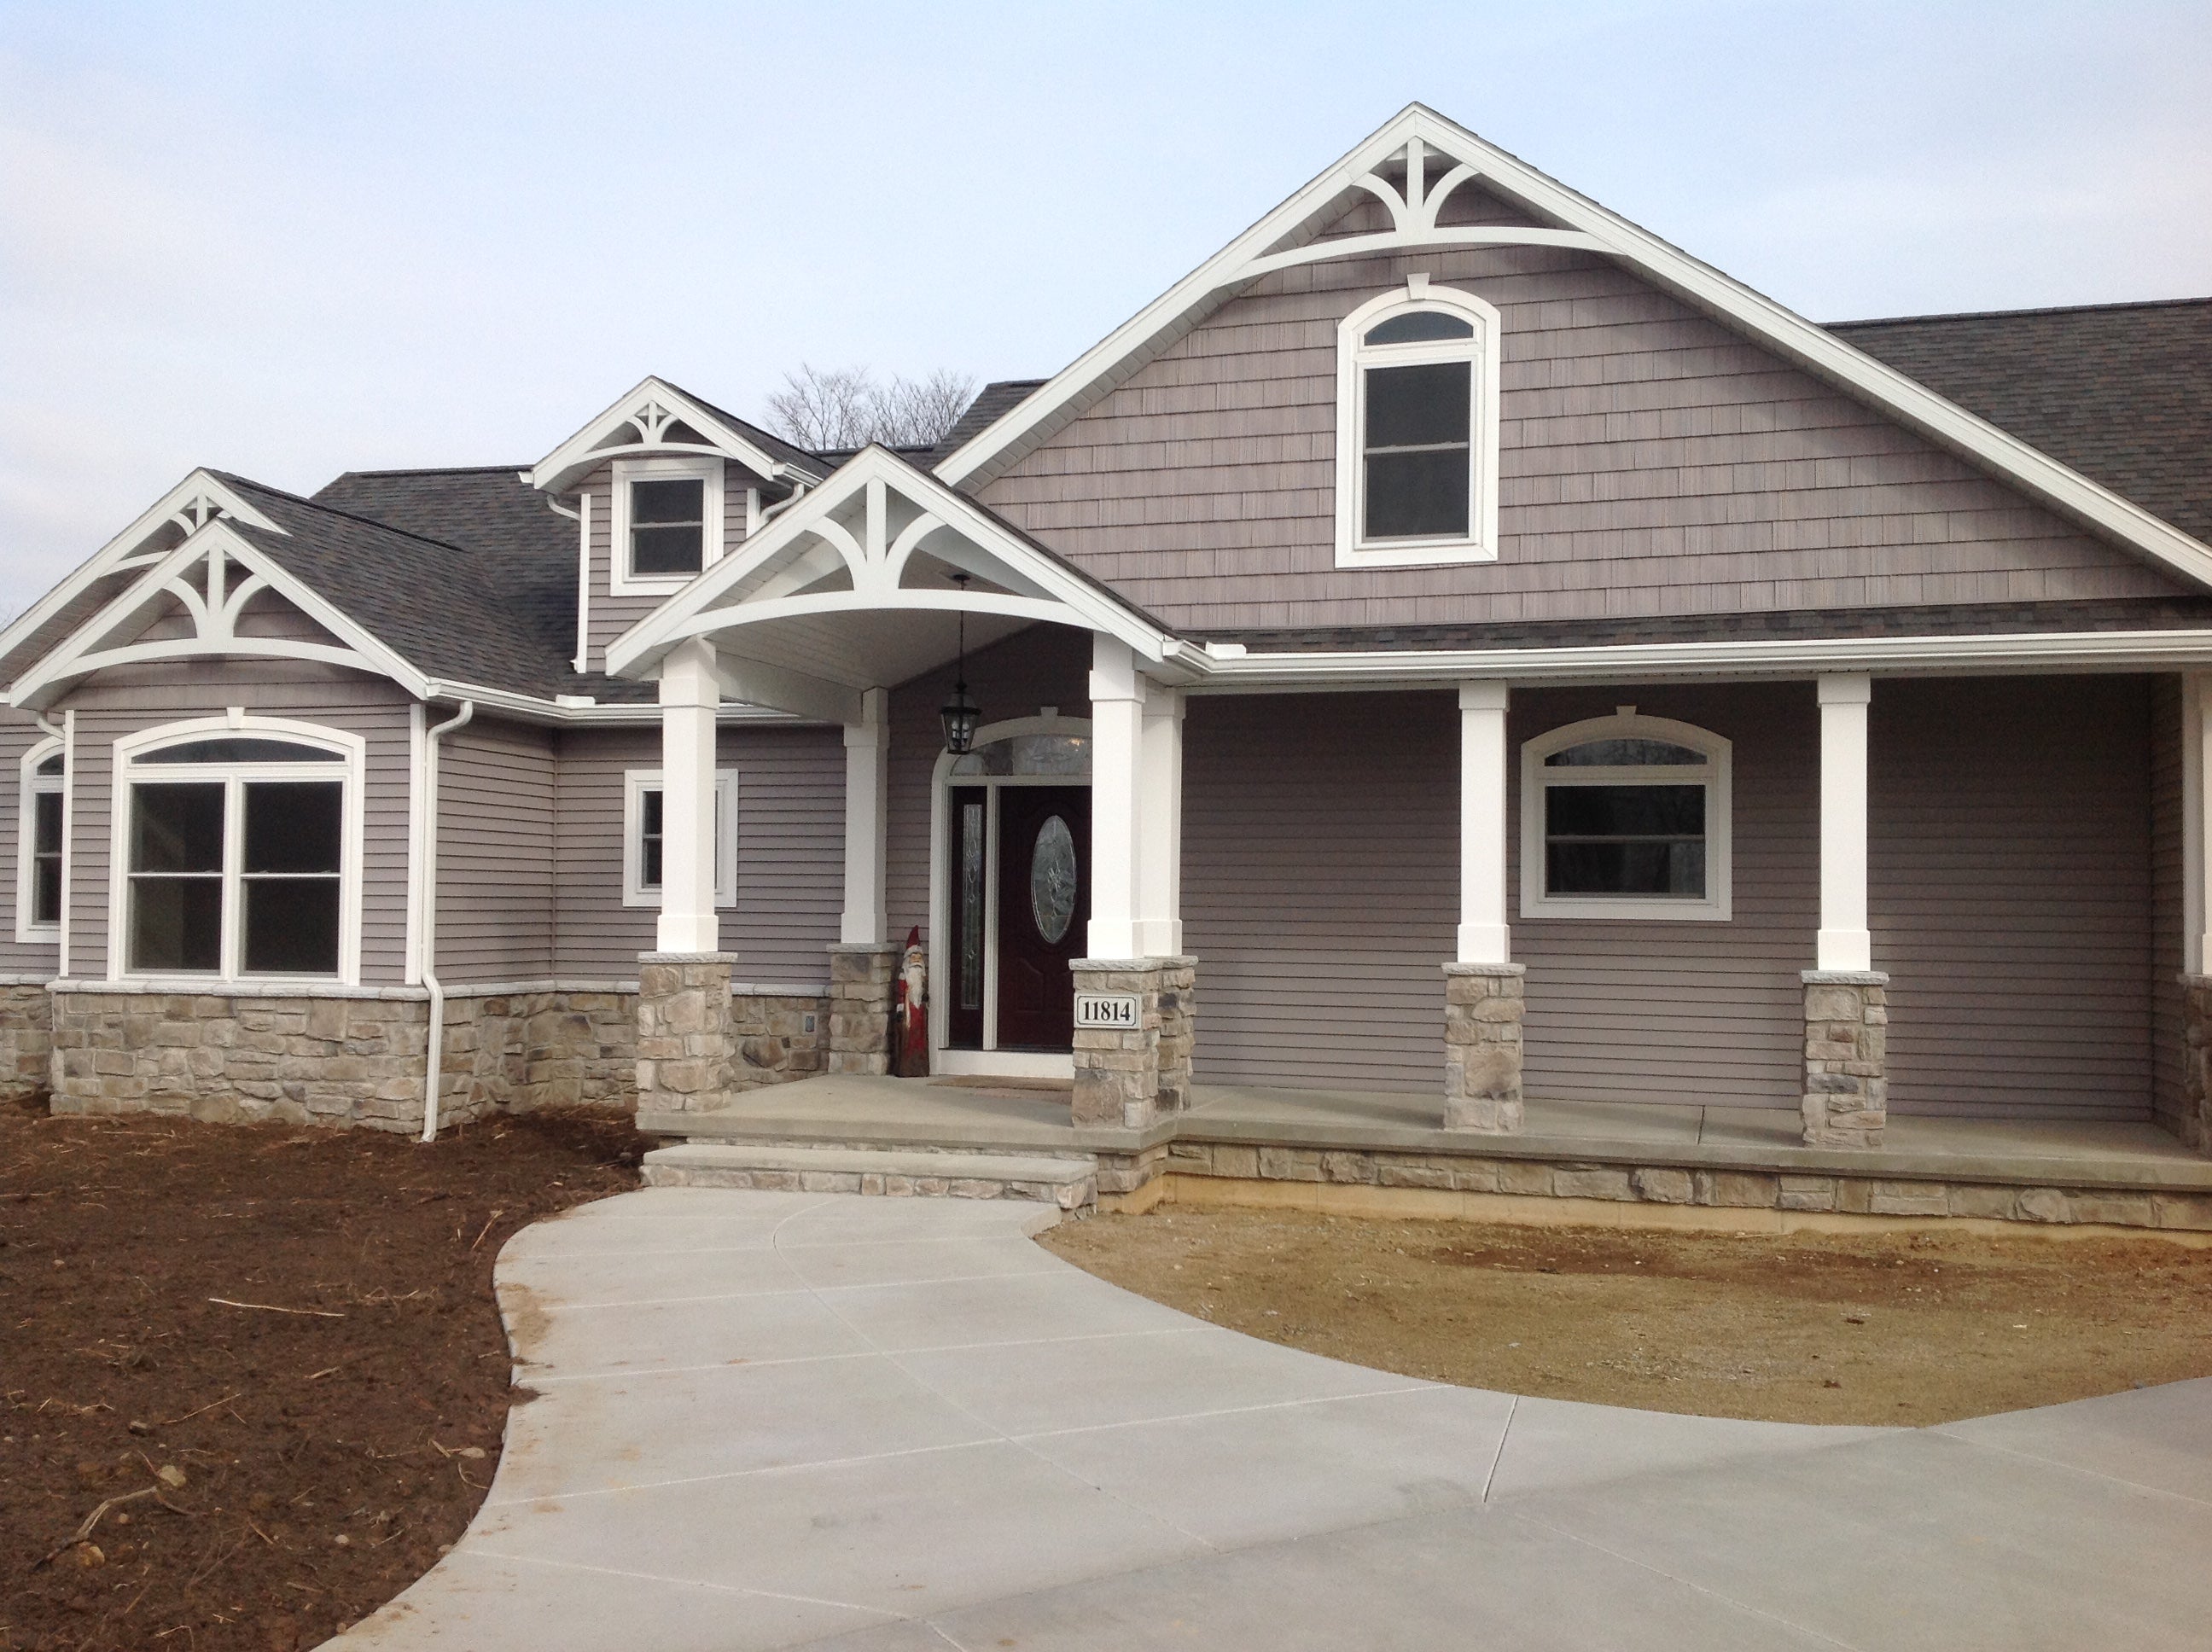 This grey home has various white gable decorations throughout the exterior design.